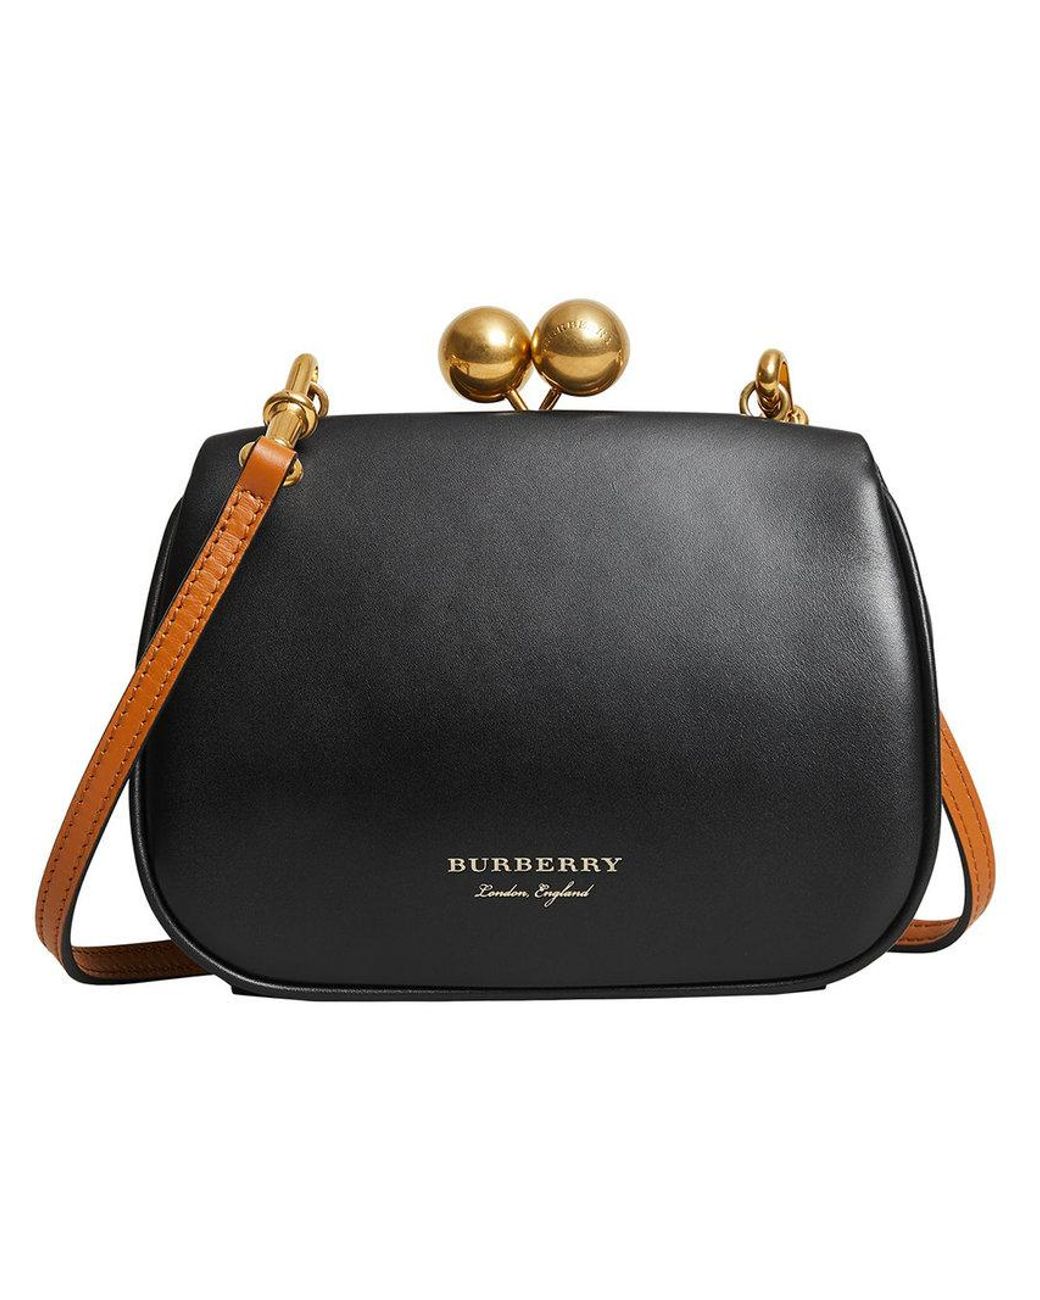 Burberry Leather Small Frame Clutch Bag in Black | Lyst